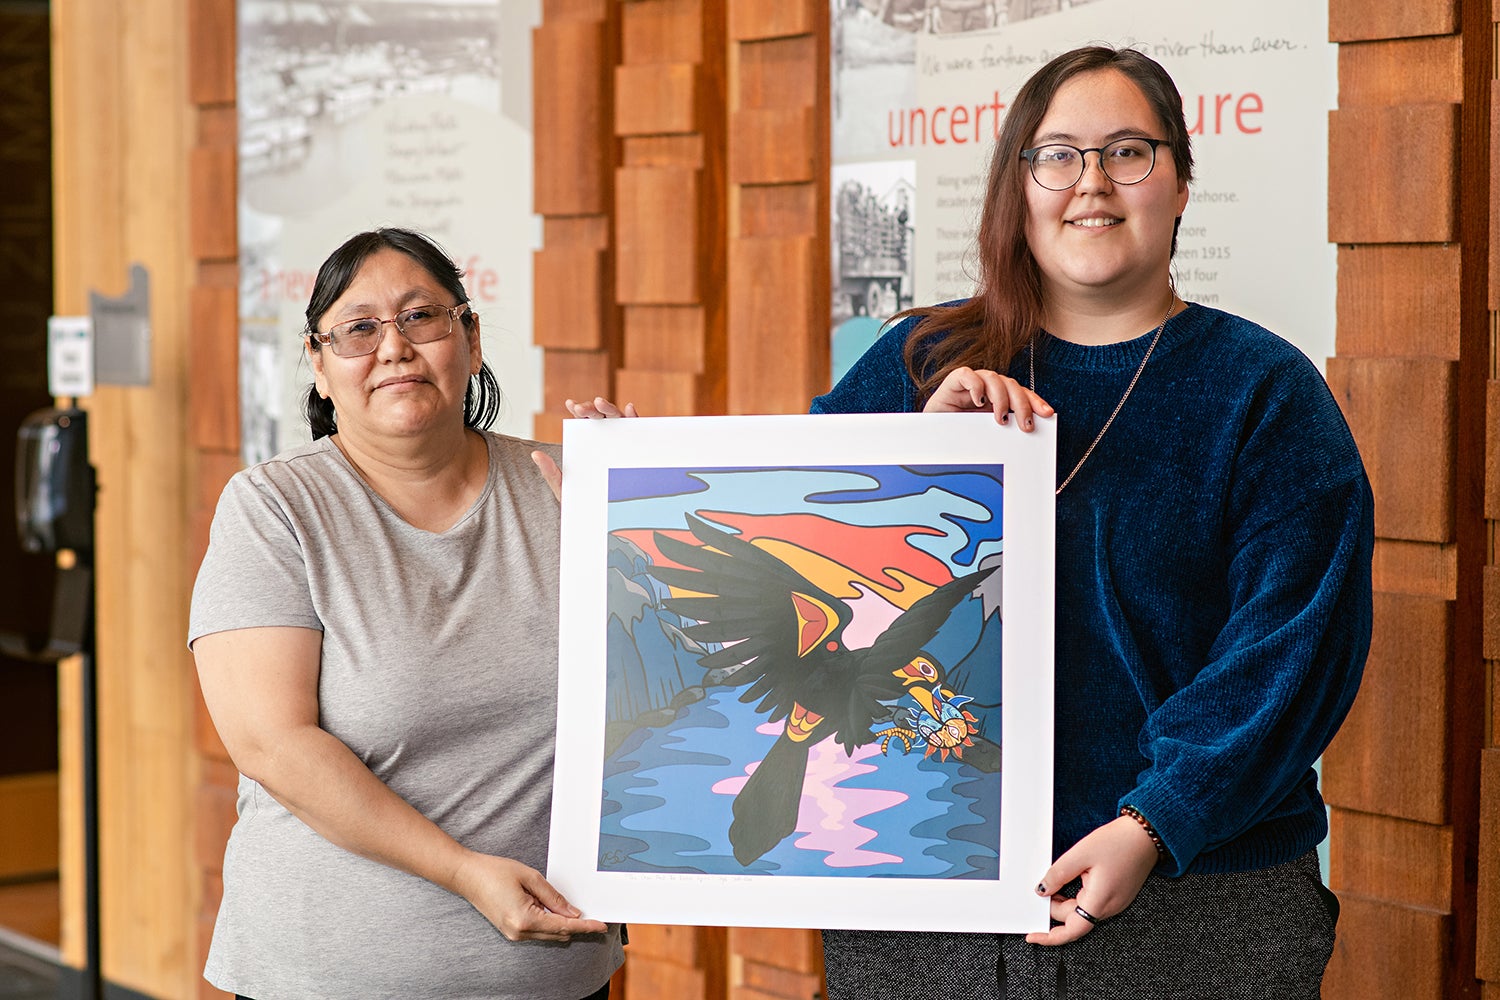 Kayla stands with her mom, Nita Clarke. Together, they're holding a copy of the Crow and The Native Spirit